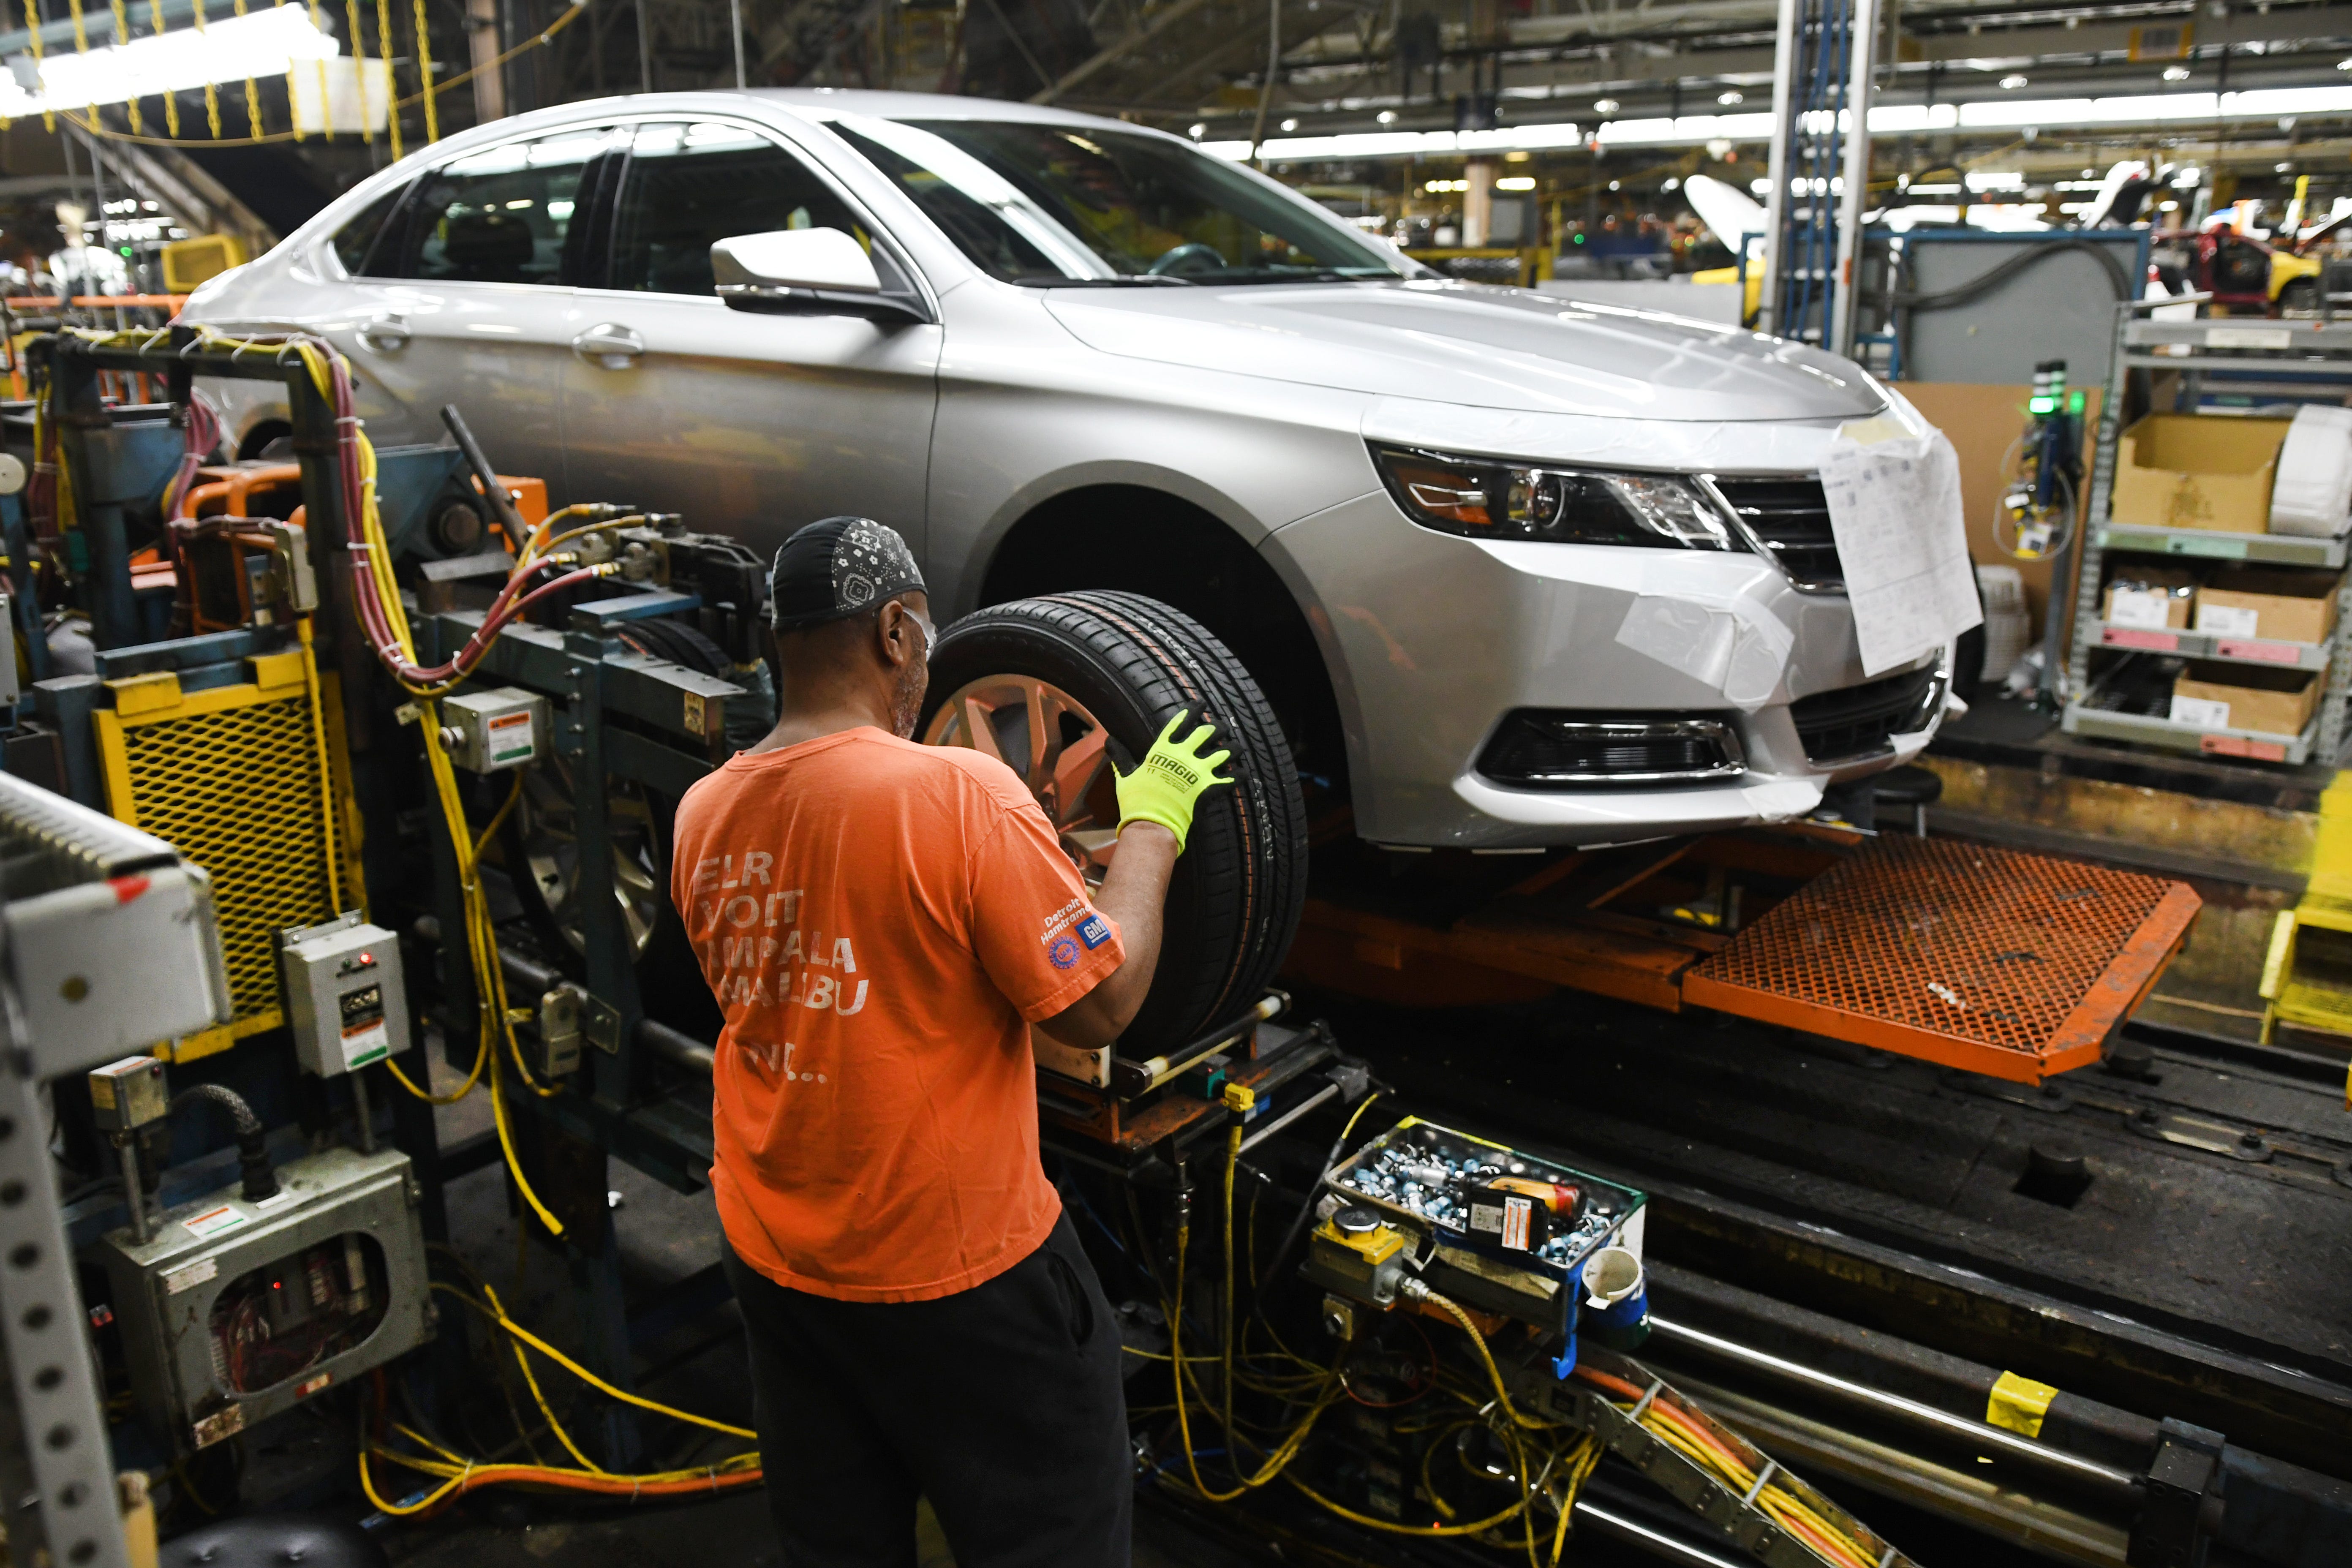 Nearly 47,000 workers were employed by GM in Michigan last year. Those jobs supported another 153,600 other jobs here, according to a study by the Center for Automotive Research that was commissioned by the automaker.